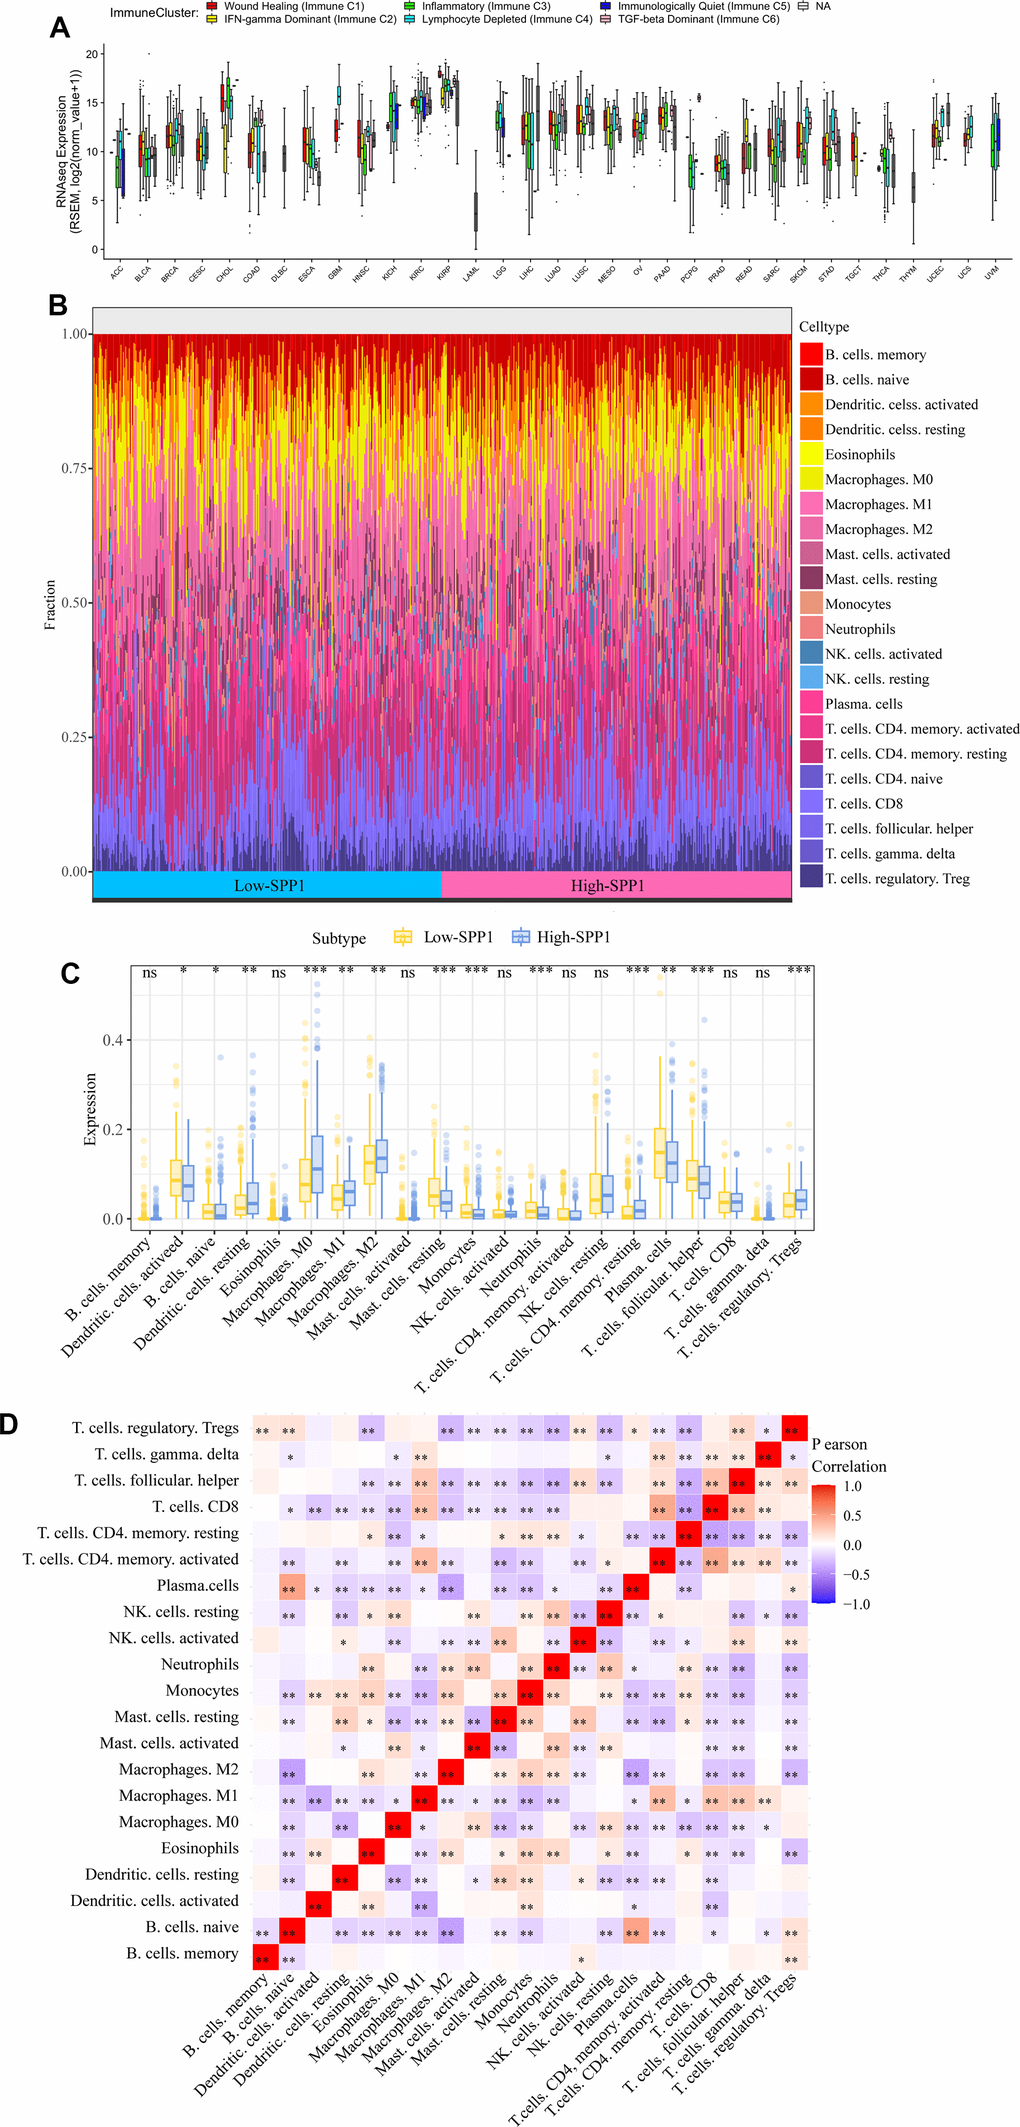 Impact of SPP1 on immune cell infiltration and distribution in LUAD. (A) Distinct immune clusters observed in different cancer types. (B) Immune landscape data of LUAD from different expression groups of SPP1. (C) Variations in the ratios of 21 different immune cell types between tumor samples with high and low SPP1 expression. (D) A heat map illustrated the spread of these immune-infiltrating cells within the tumor specimens. ns: no statistical significance, *p